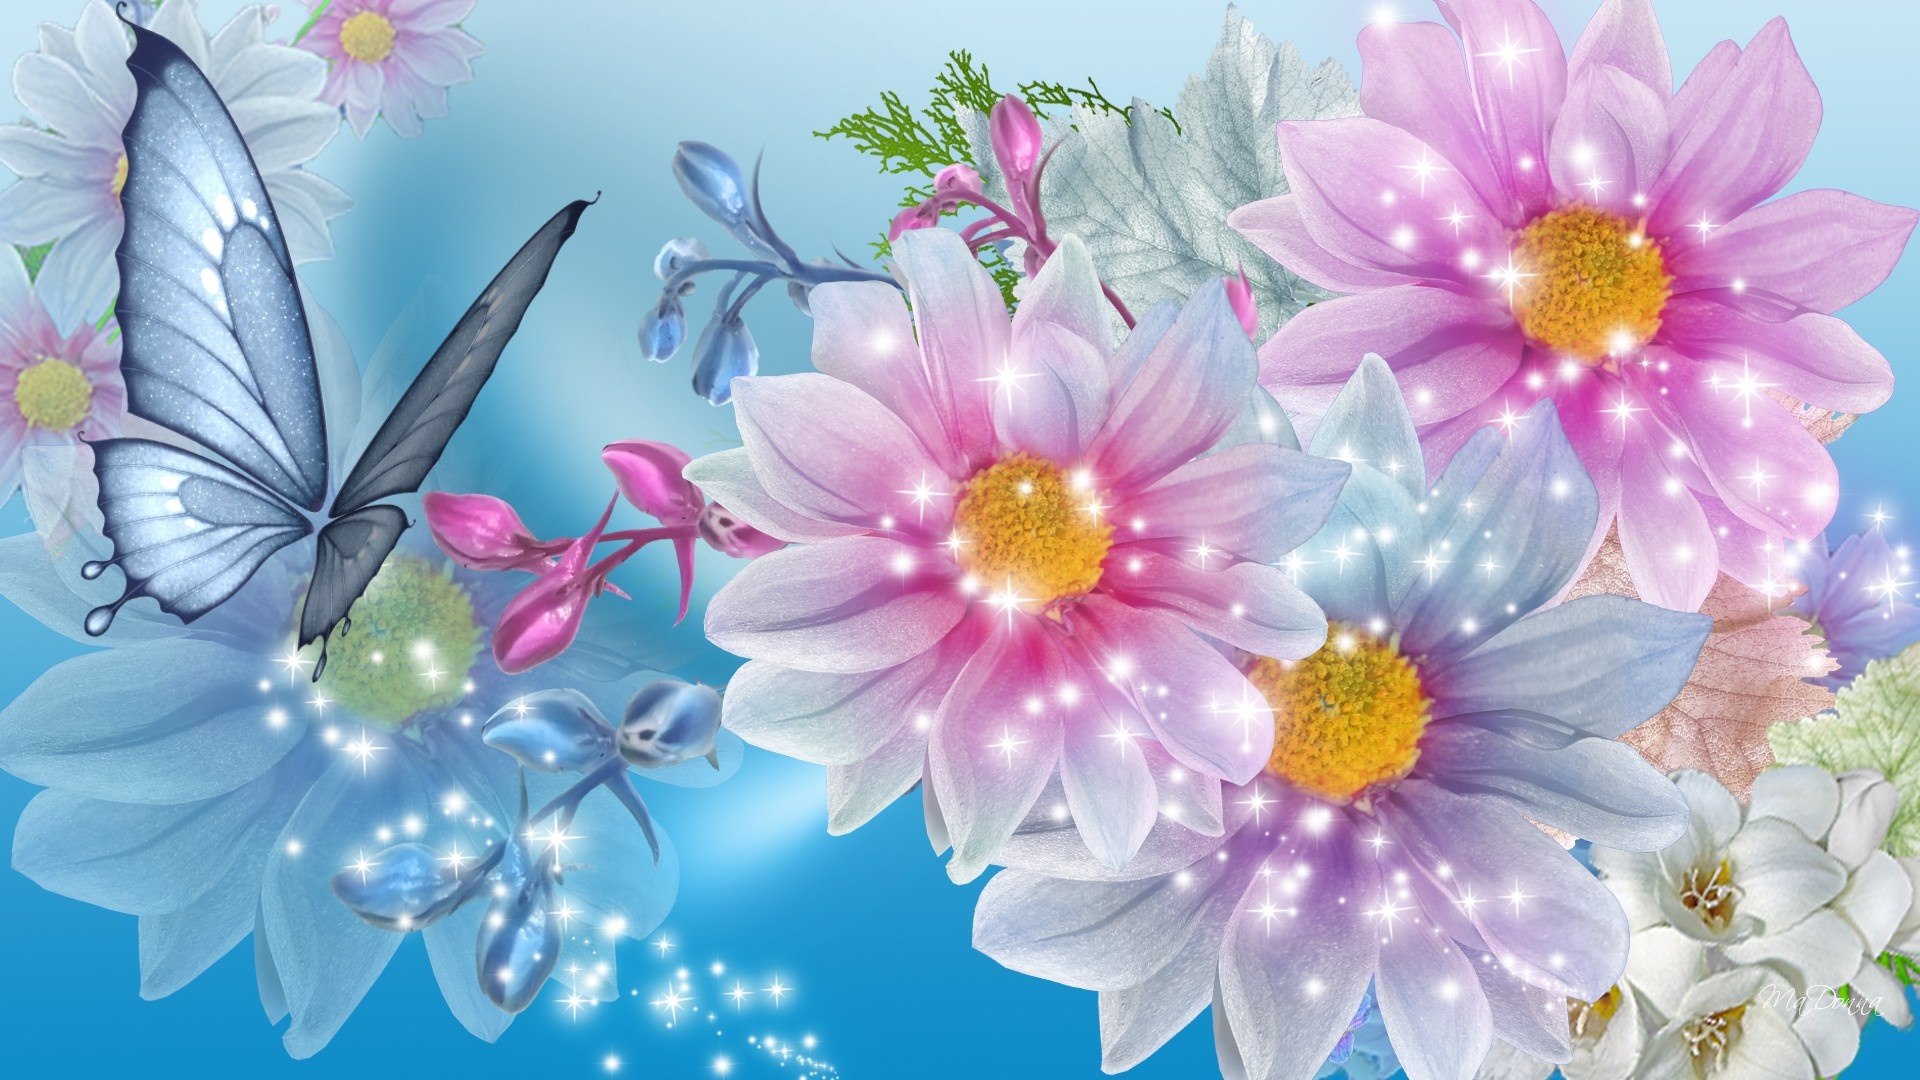 169 Flower Backgrounds Wallpapers Pictures Images